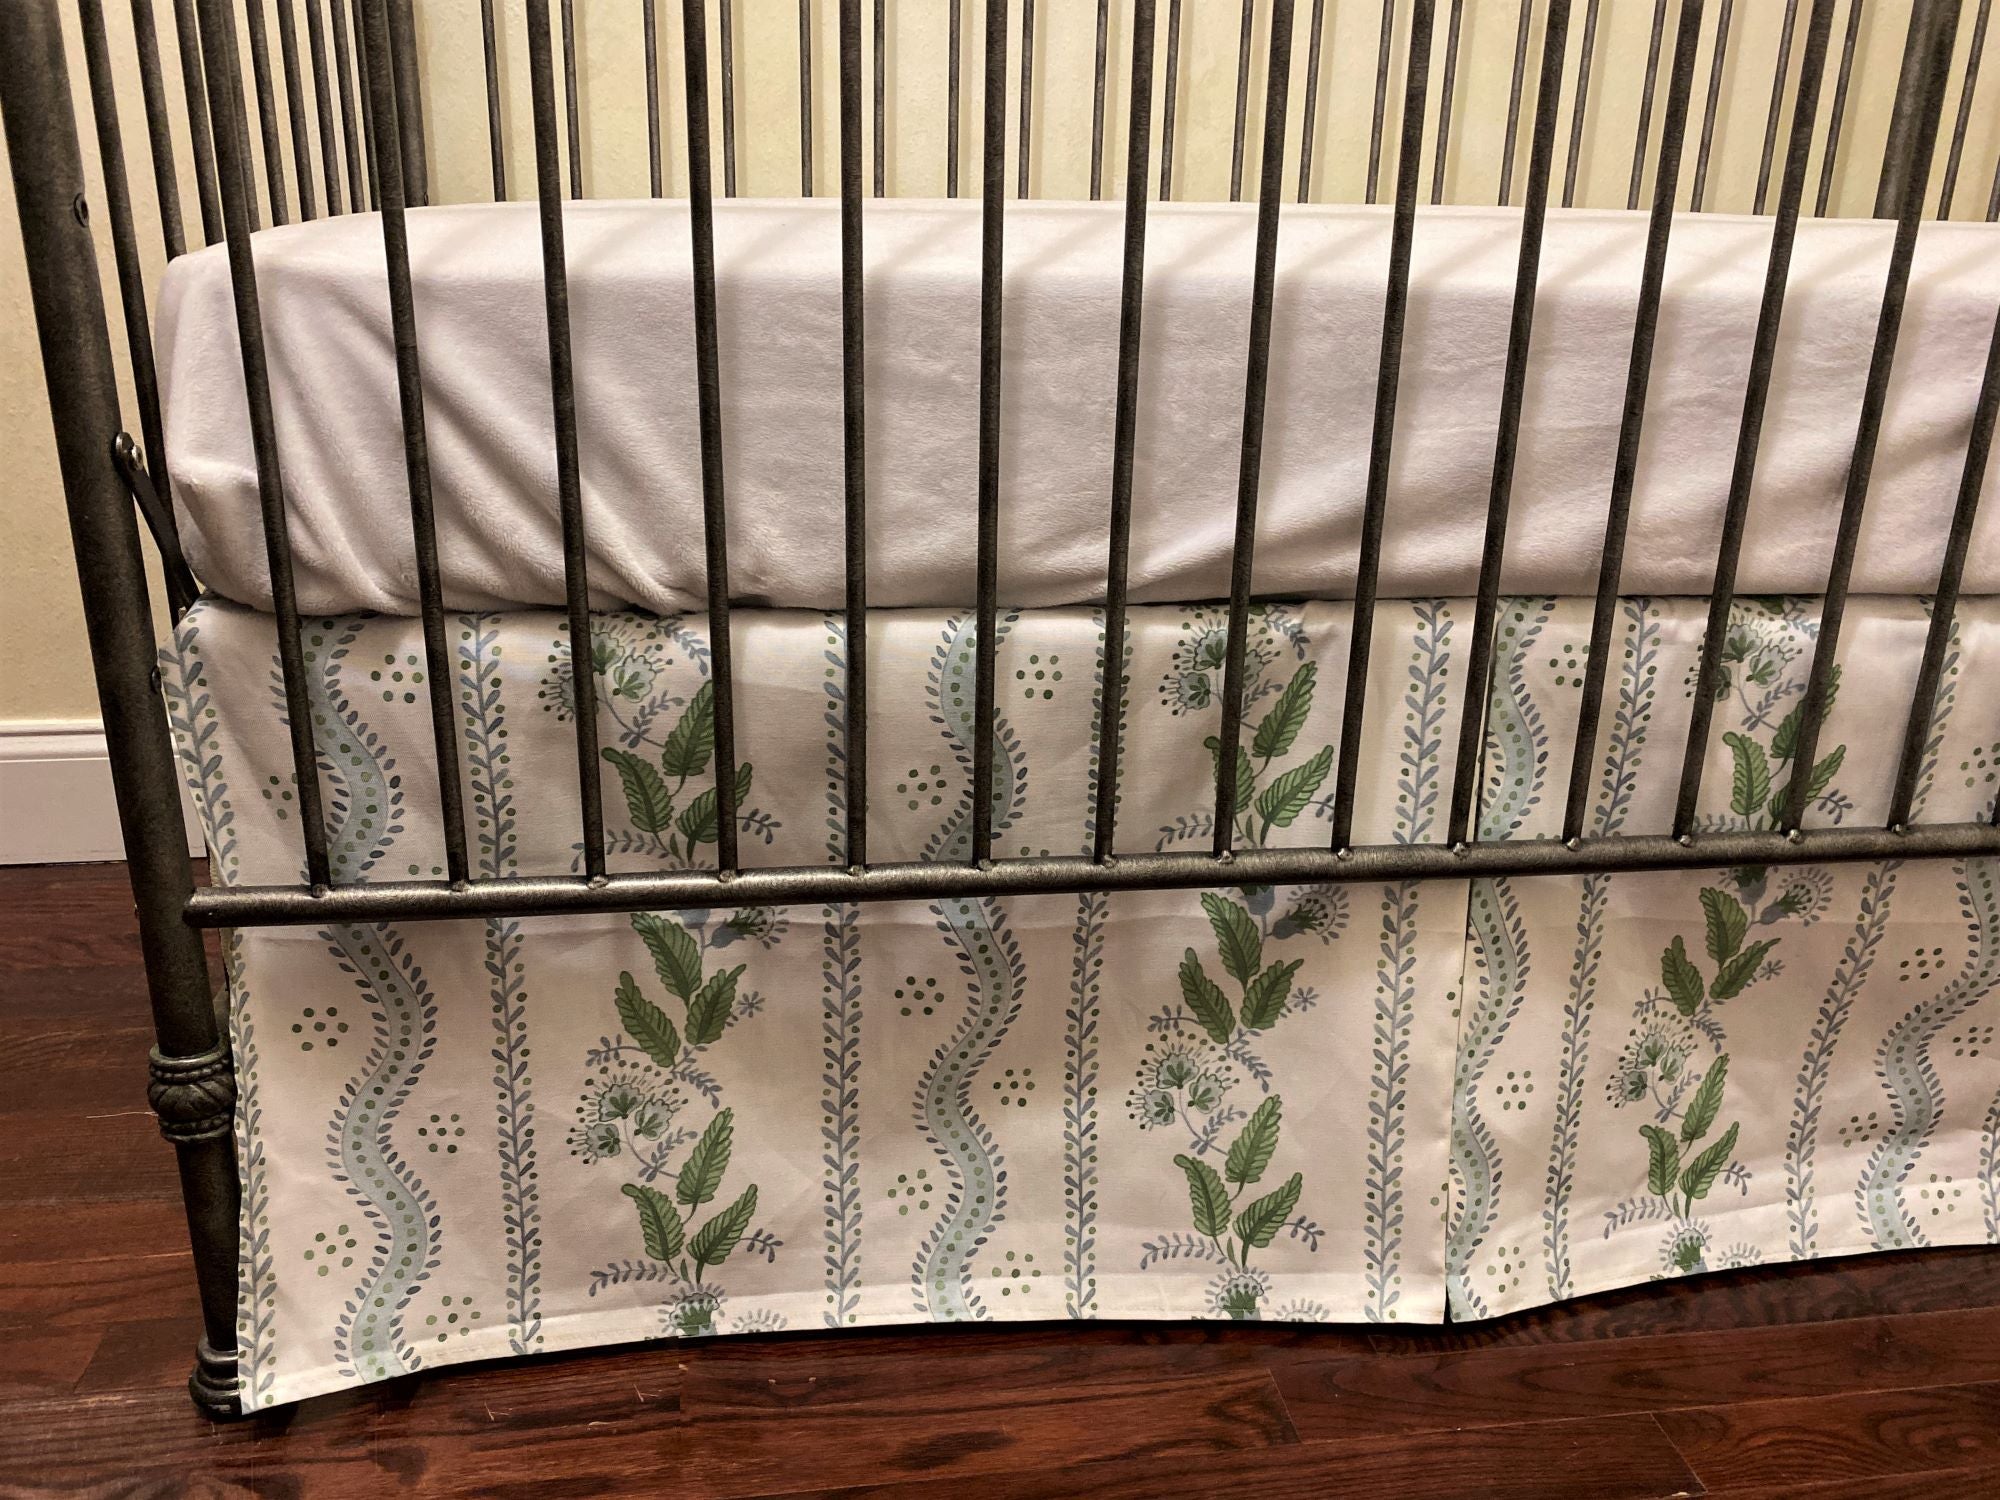 Tailored, Pleated Crib Skirt in Stripes and Vines Designer Fabric, Choose Your Color